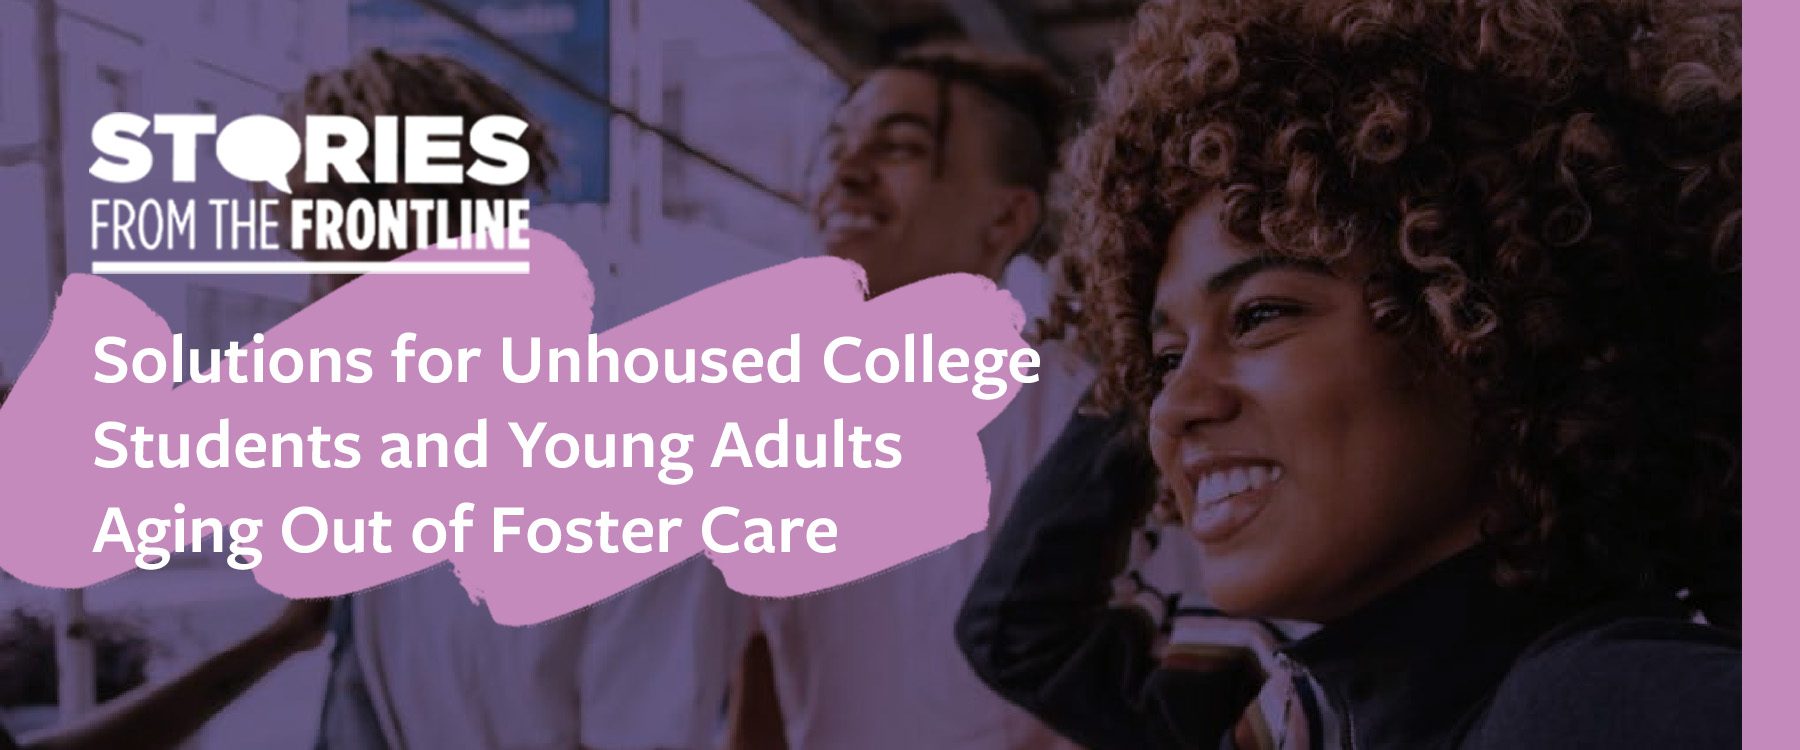 Stories from the Frontline: Solutions for Unhoused College Students and Young Adults Aging out of Foster Care